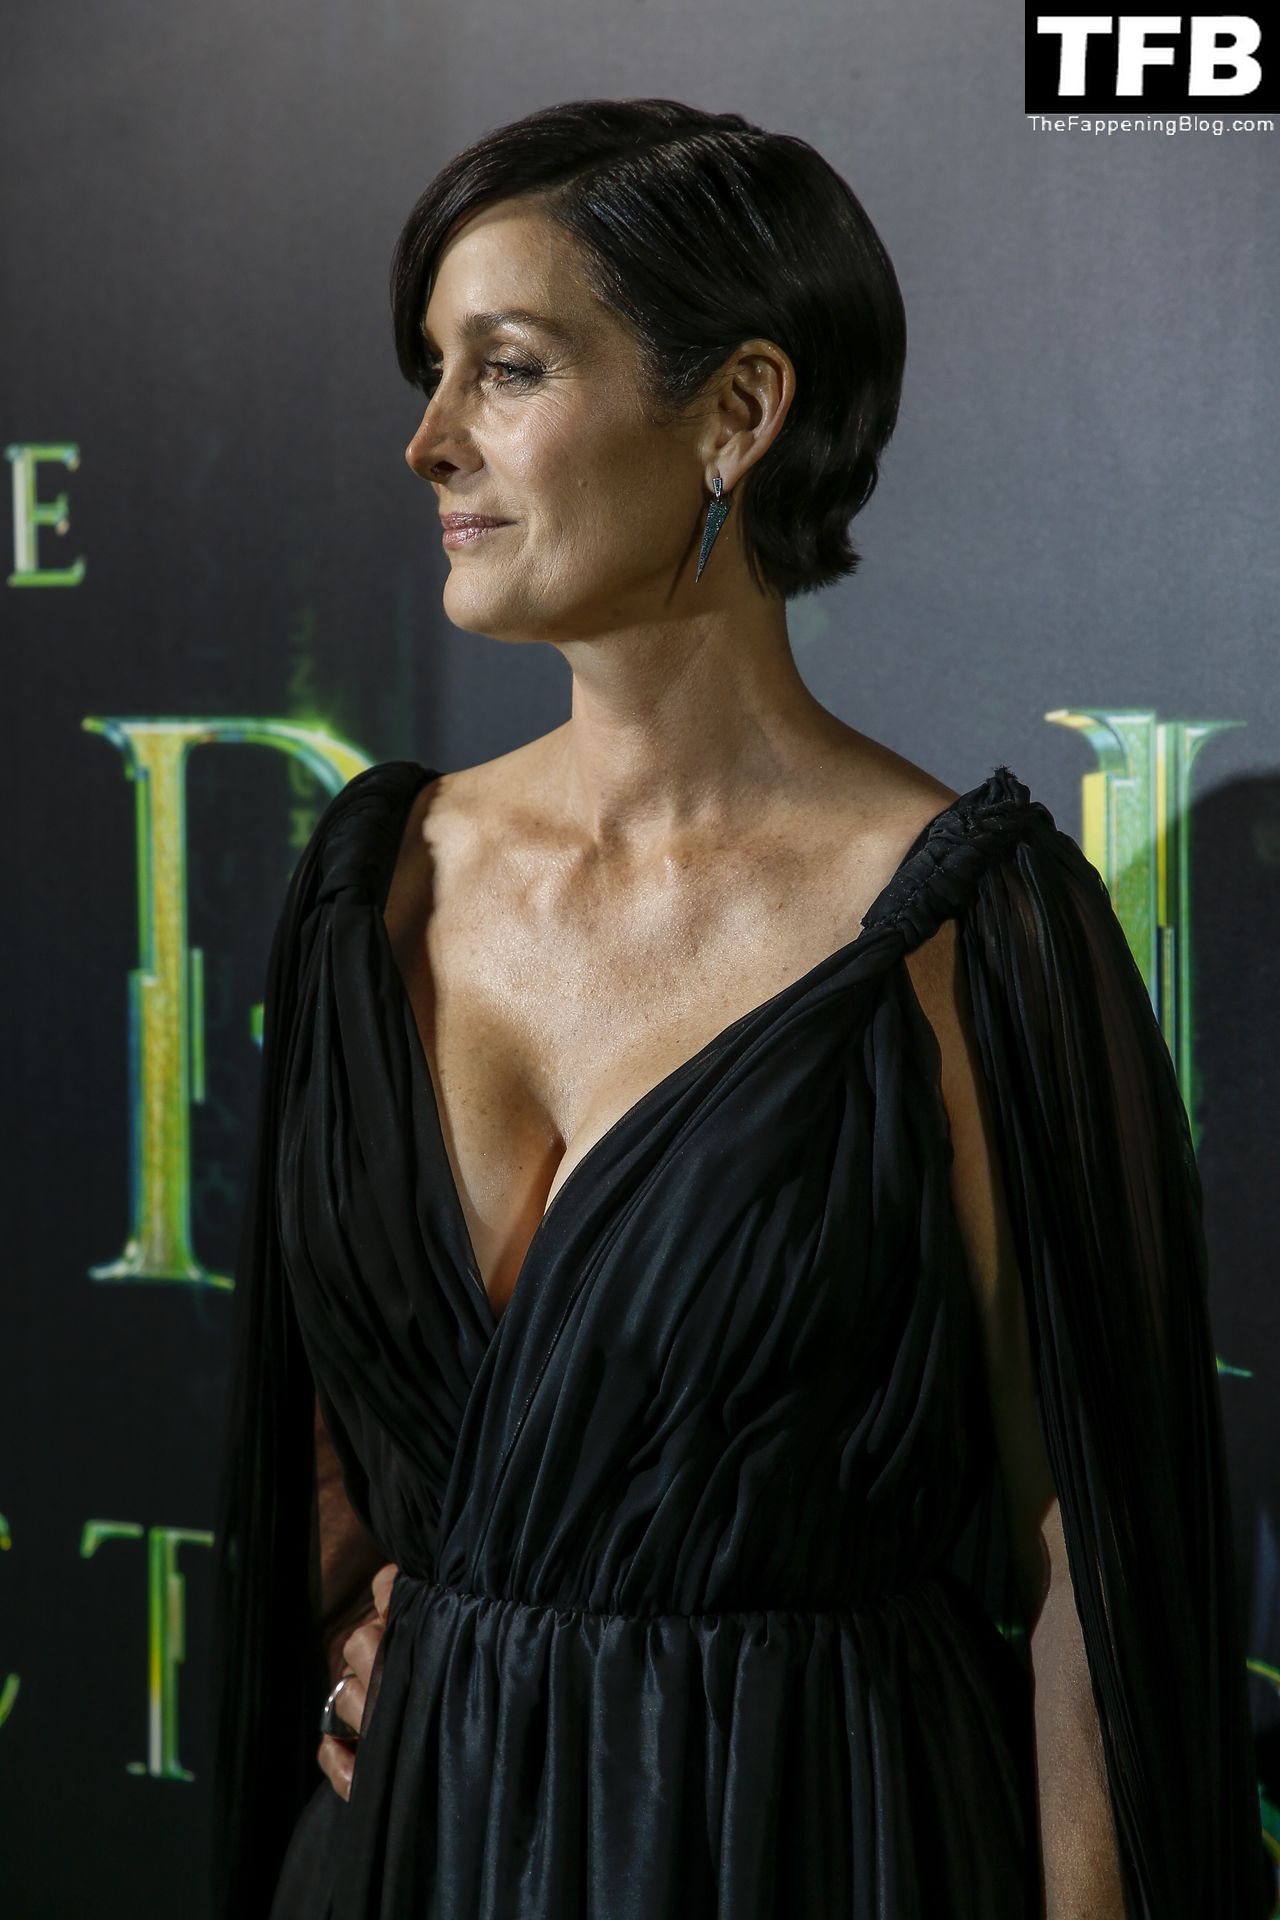 Carrie-Anne-Moss-Sexy-The-Fappening-Blog-17.jpg